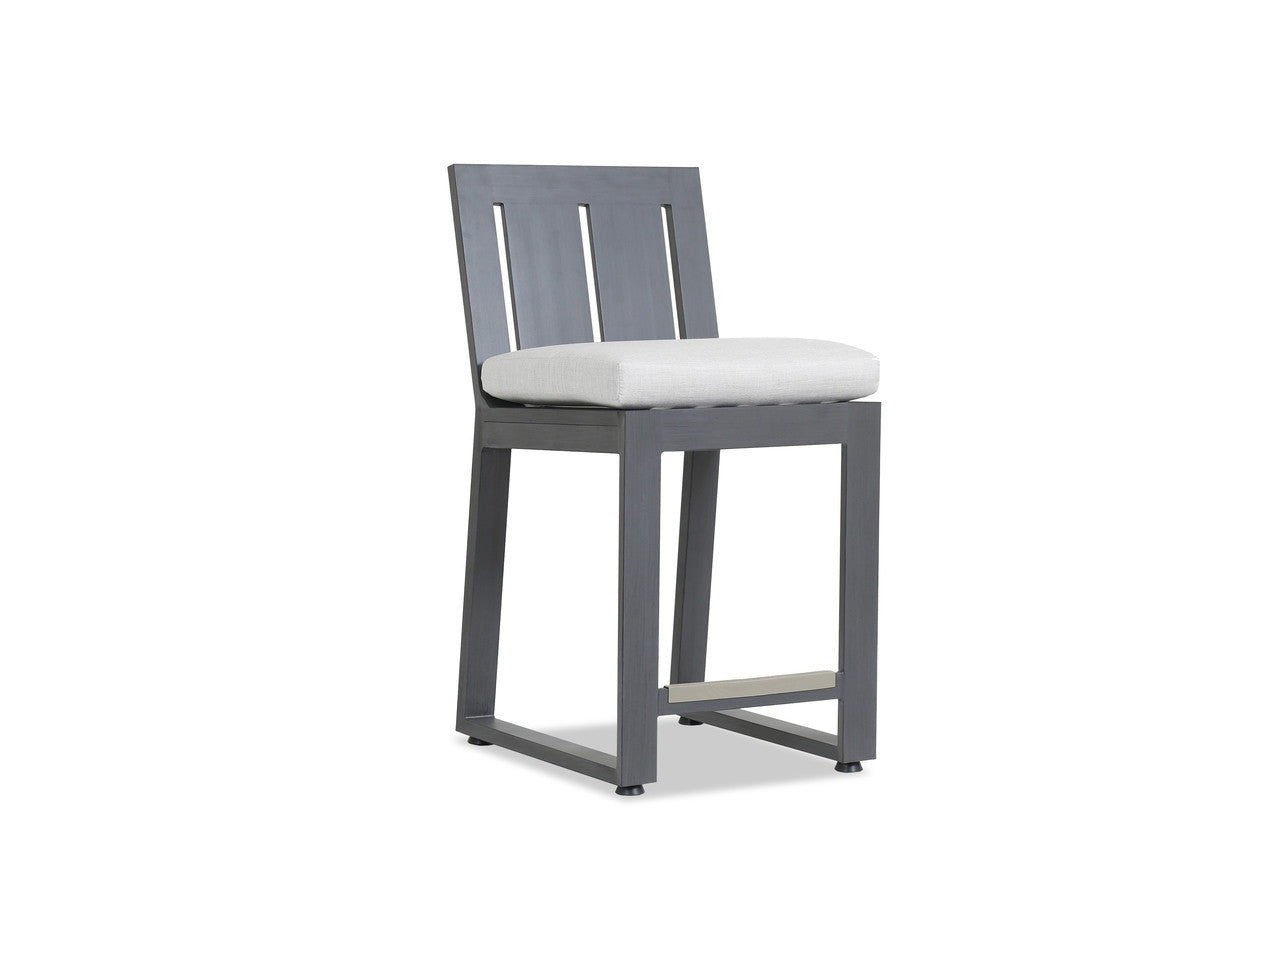 Replacement Cushions for Sunset West Redondo Barstool